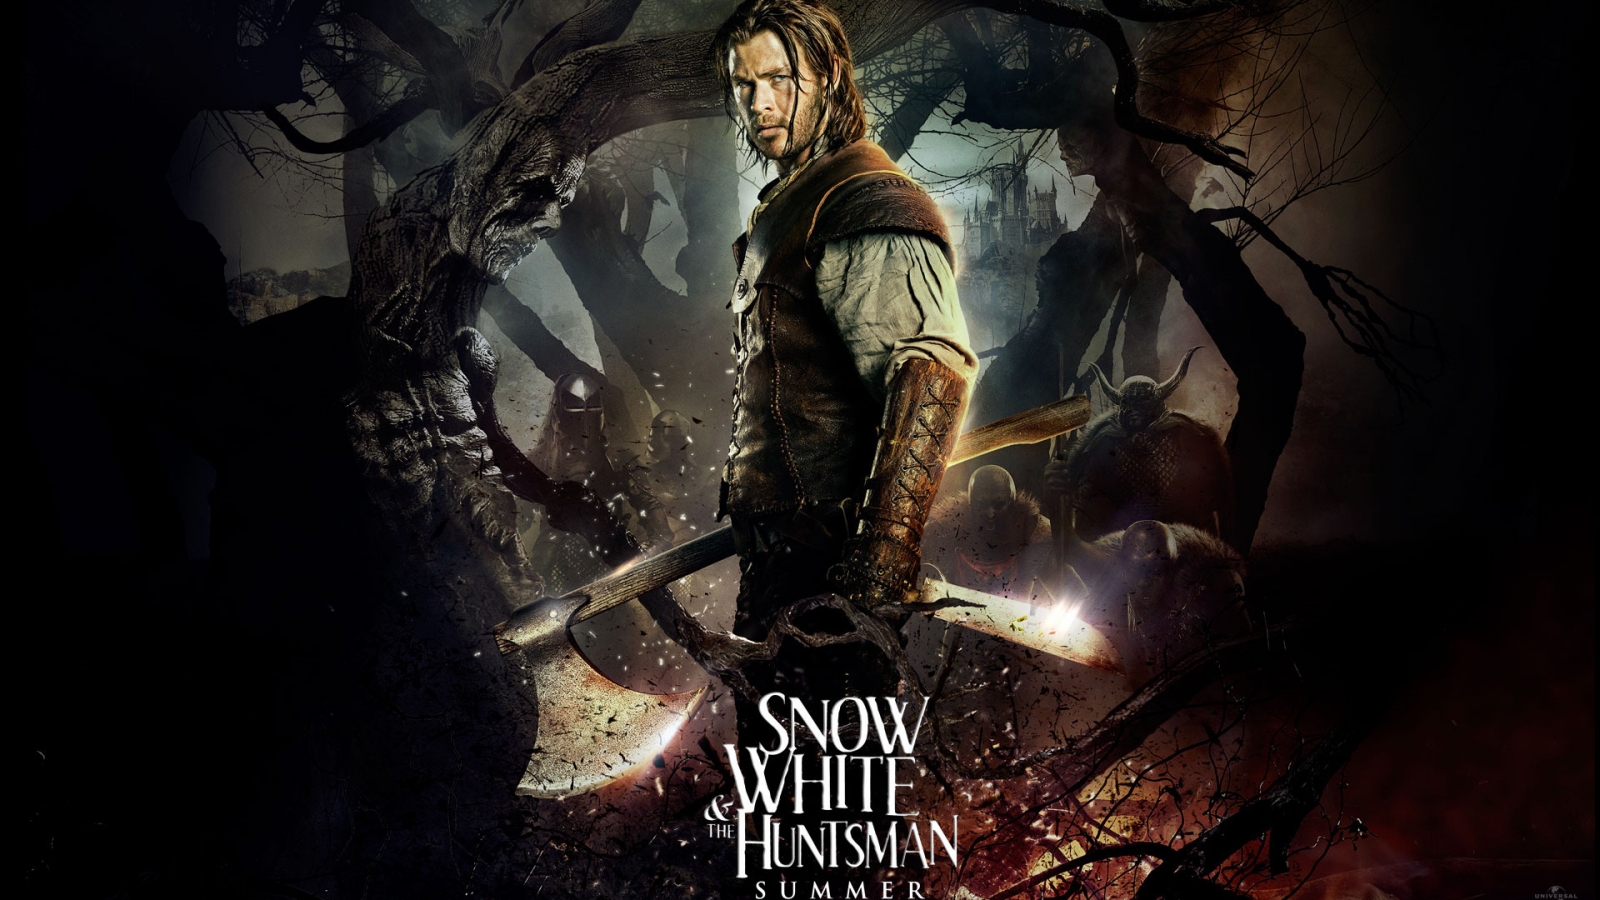 The Huntsman in Snow White Movie 2012 for 1600 x 900 HDTV resolution